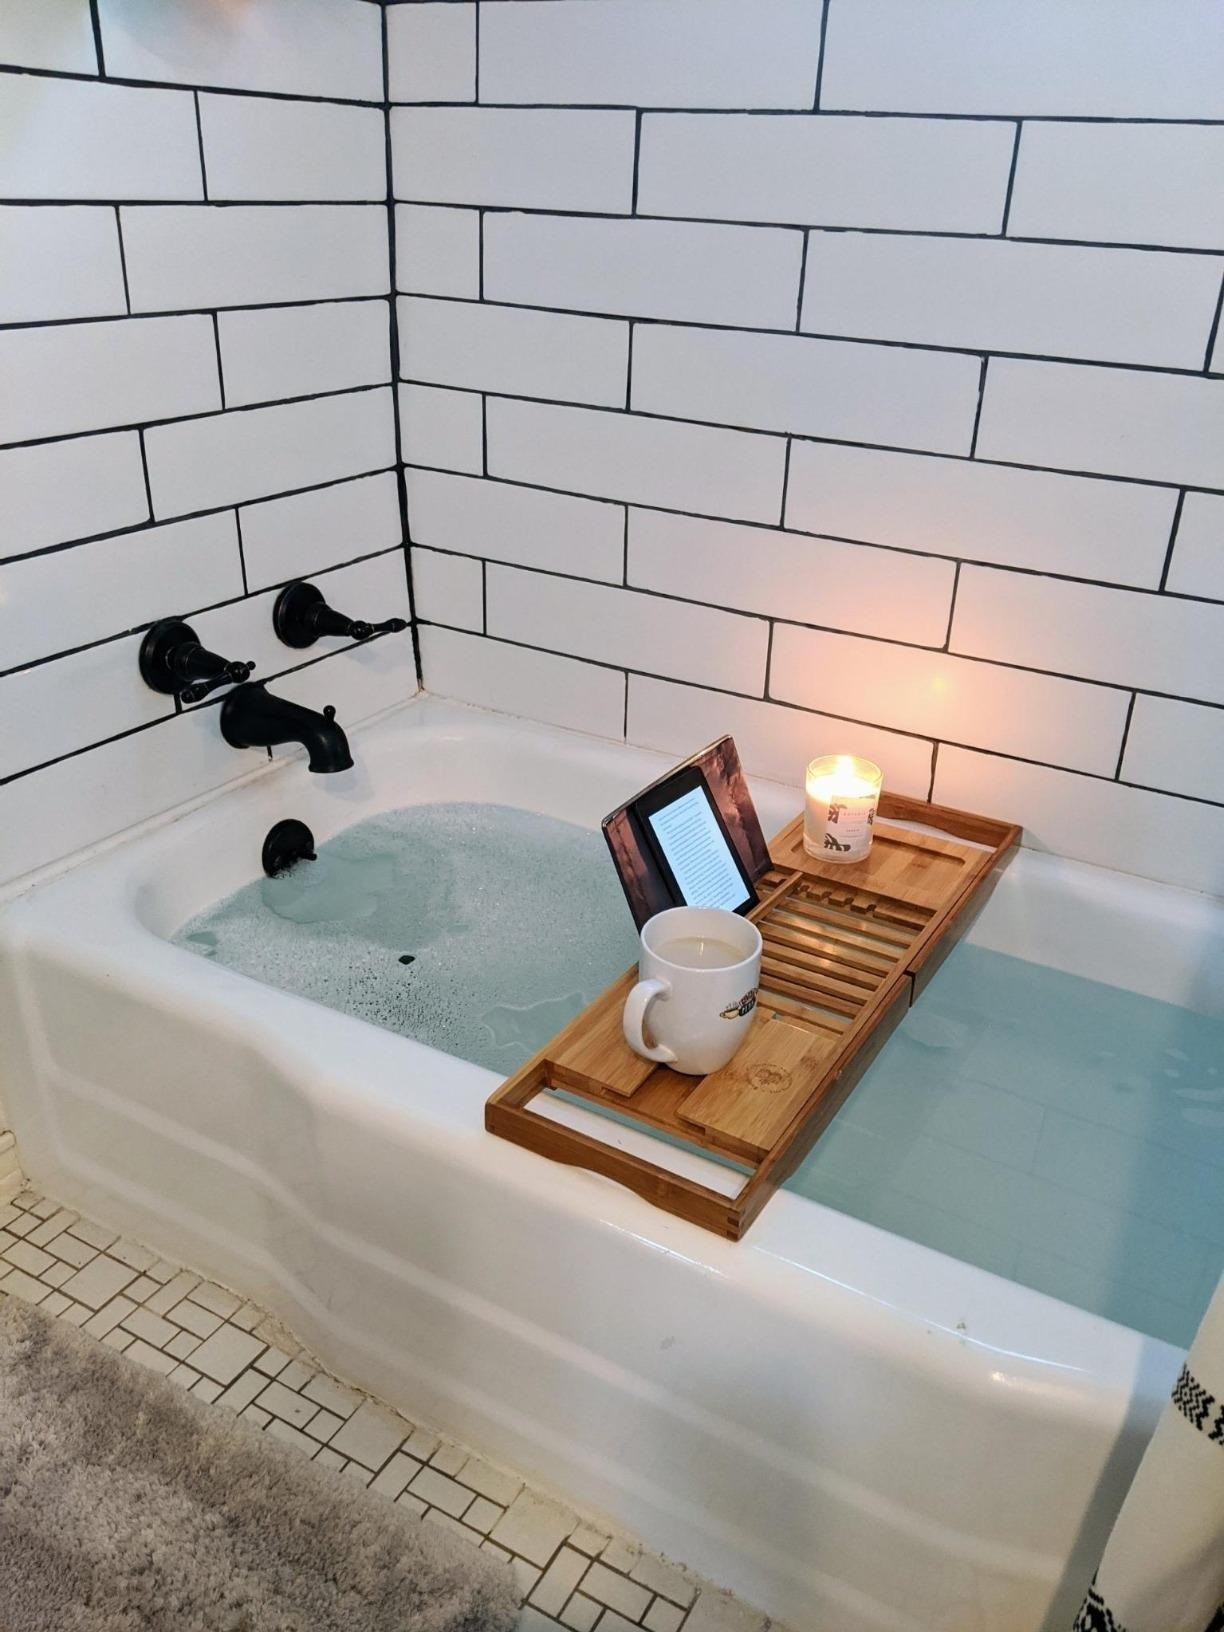 reviewer image of the caddy on their bathtub with a mug, a candle, and a kindle